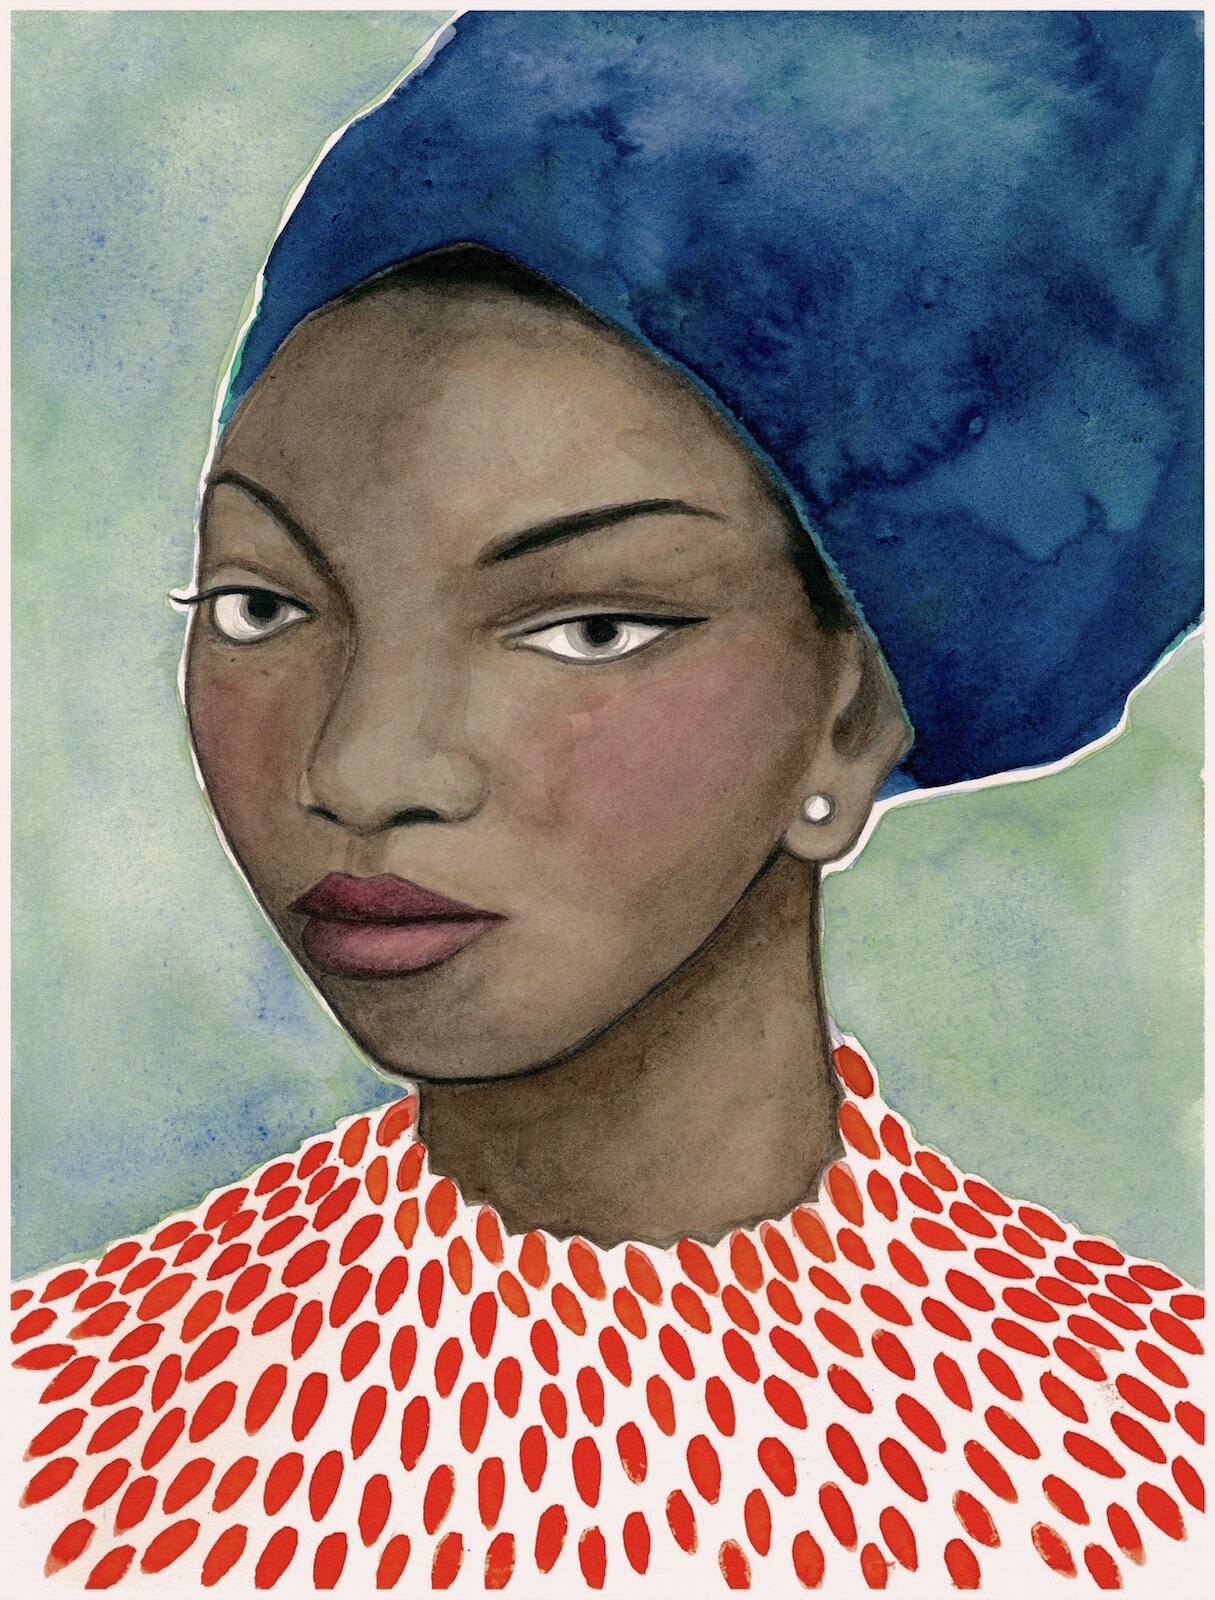   Nina Simone   watercolor and gouache on paper  12 x 9 inches, 2017   (NFS)  